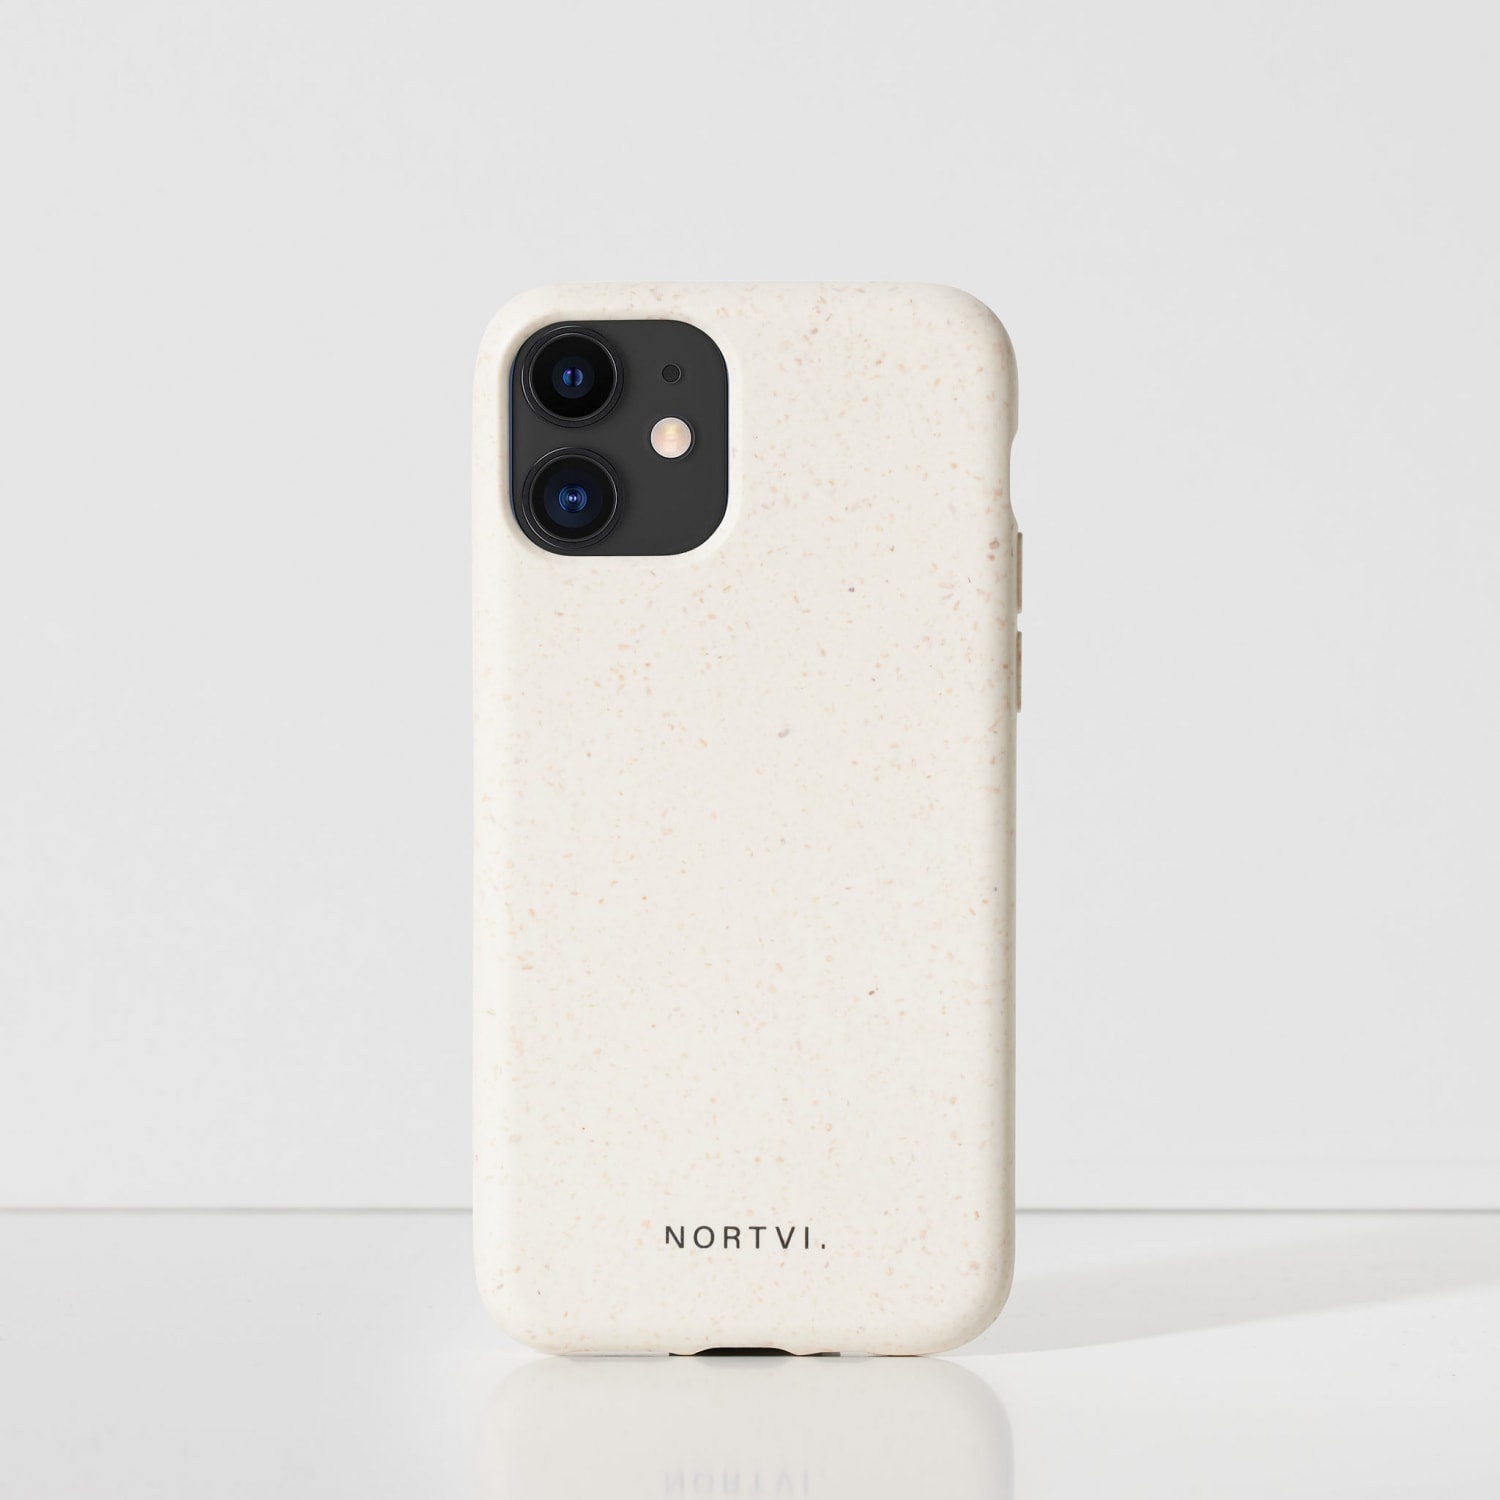 NORTVI white phone case for iPhone 11 case